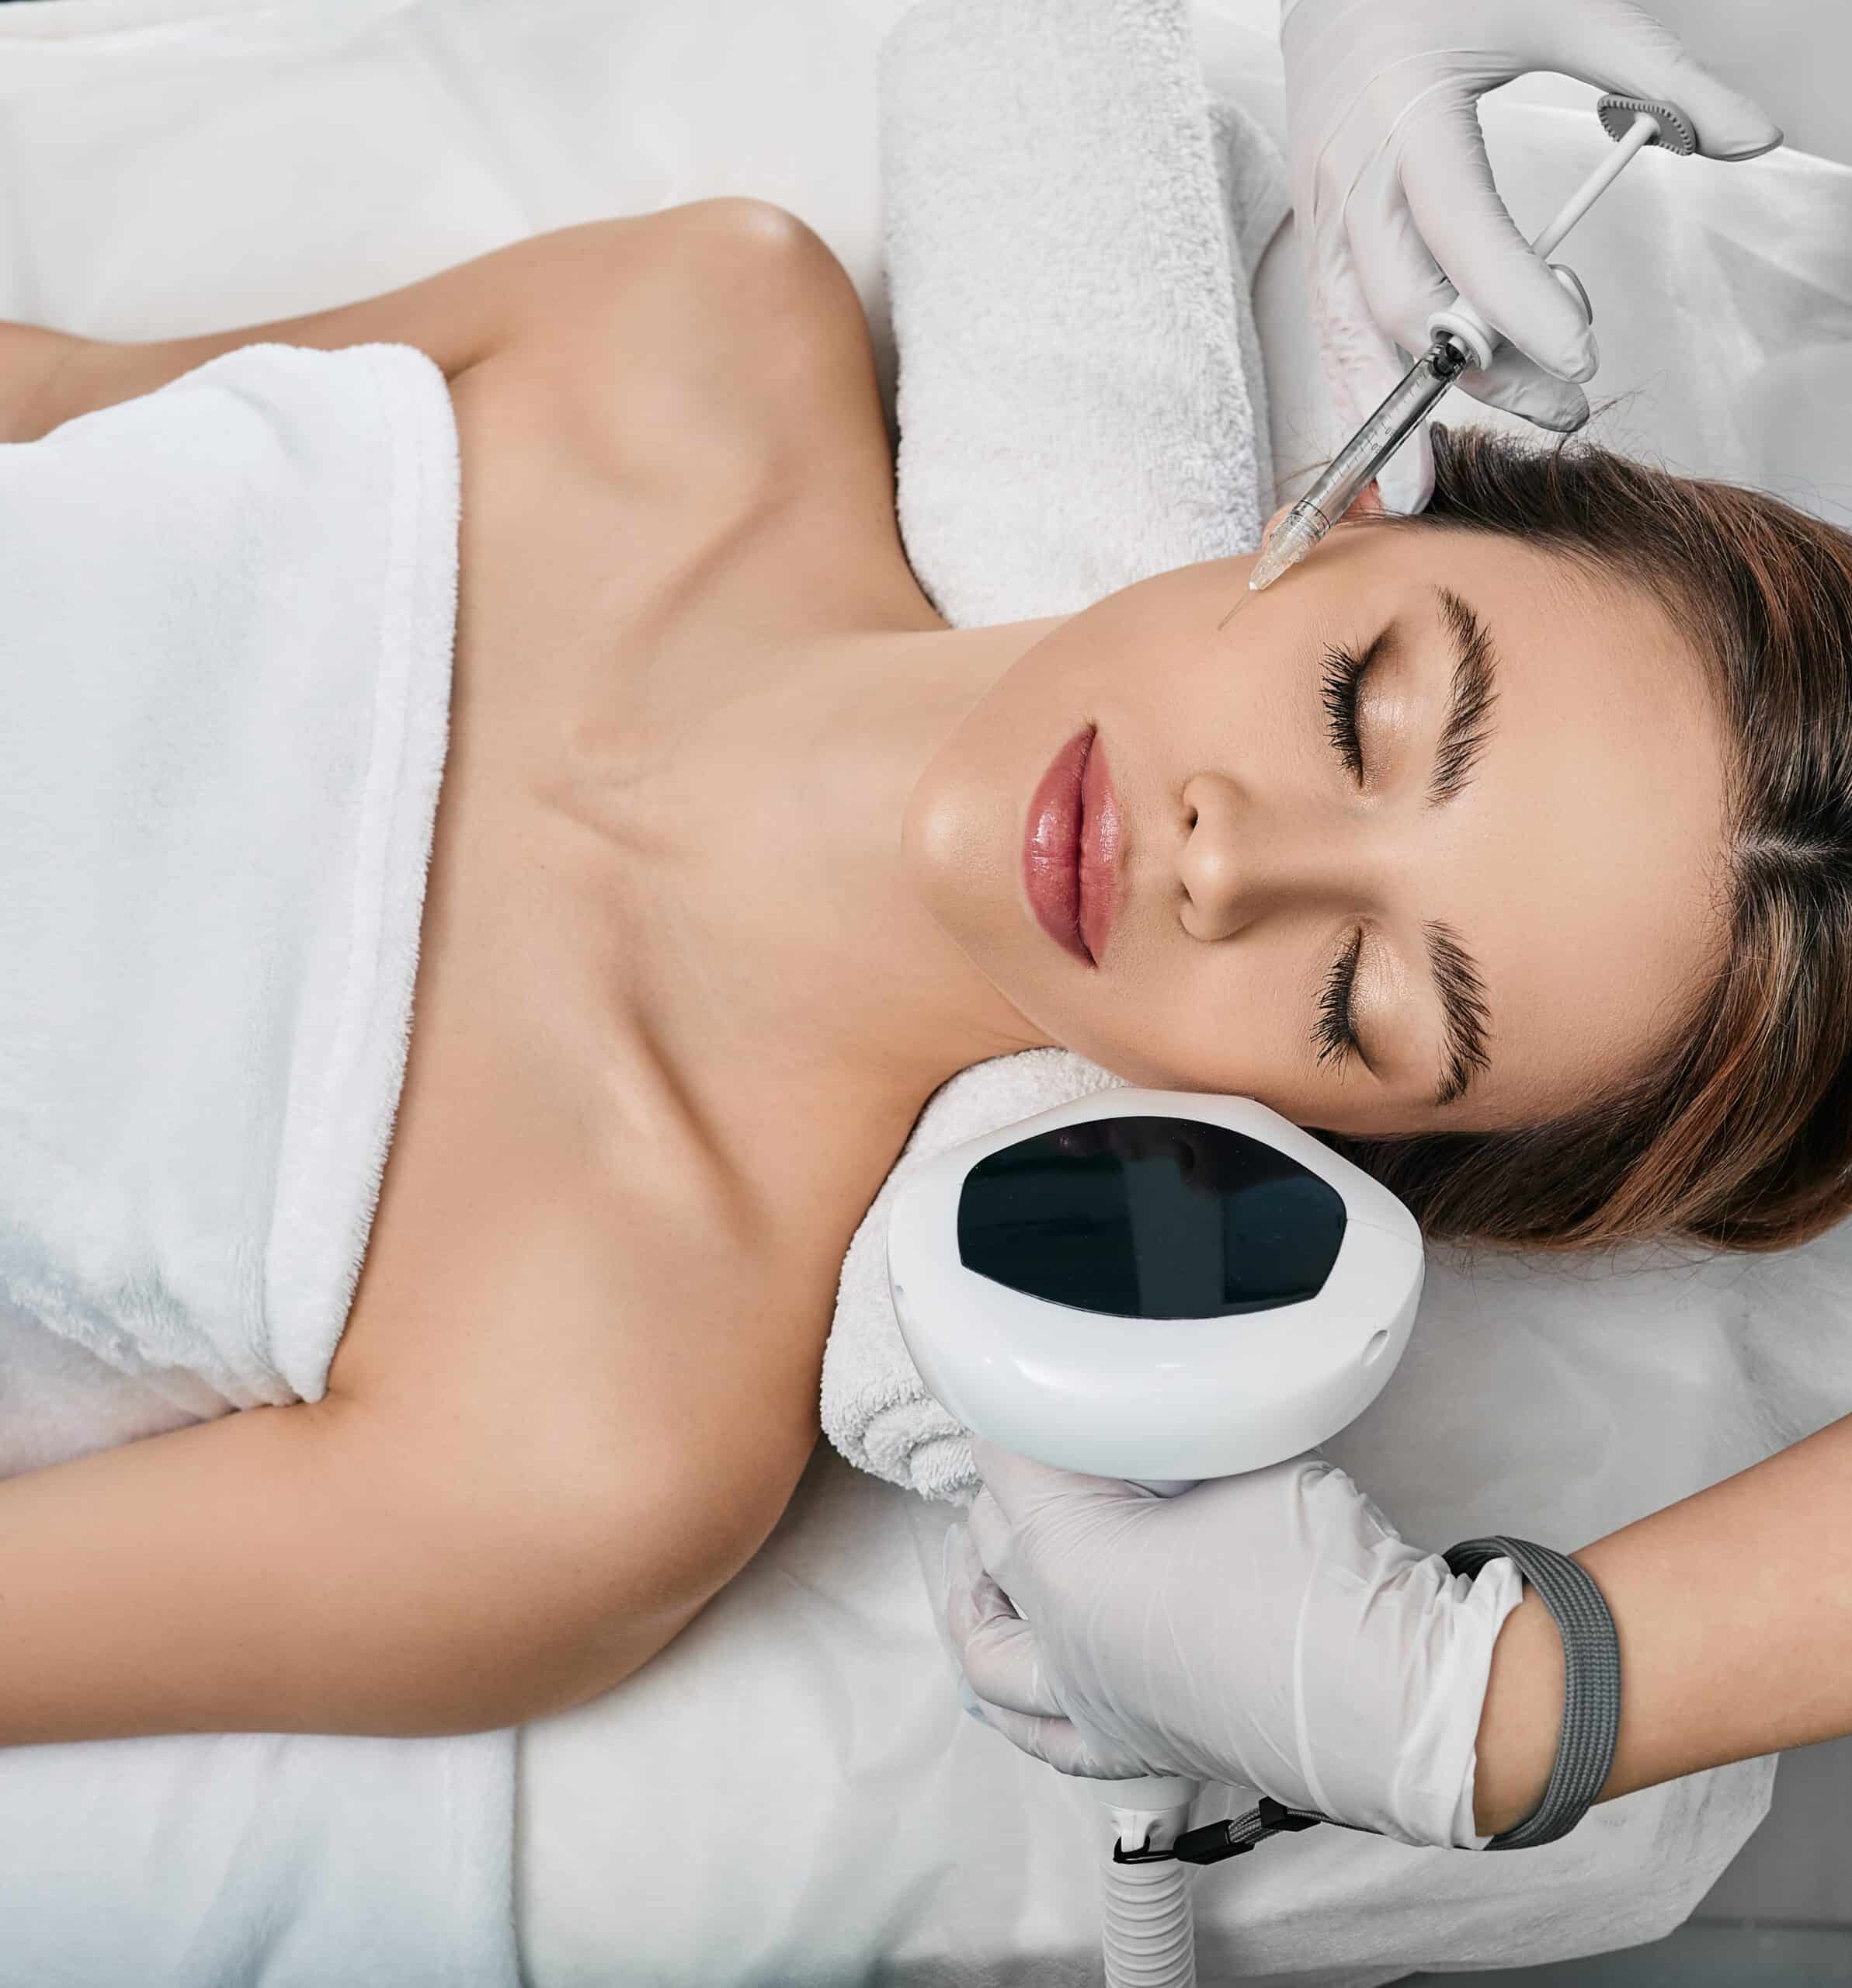 Photorejuvenation, rosacea treatment, removing brown spots and vascular mesh. Cosmetologist using IPL apparatus treats skin of female patient's face